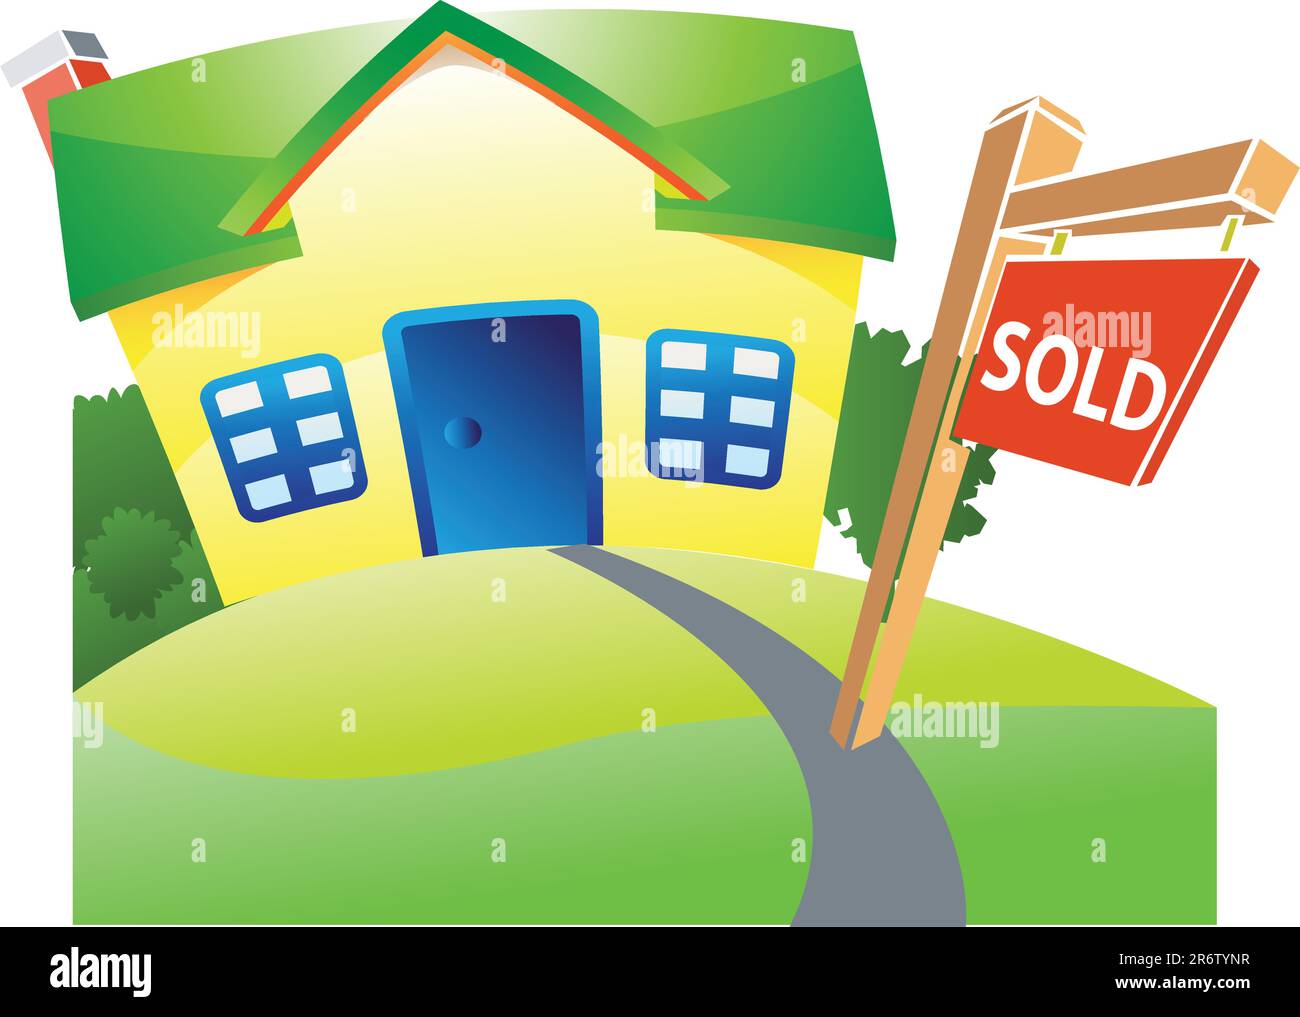 Sold house small building illustration Stock Vector